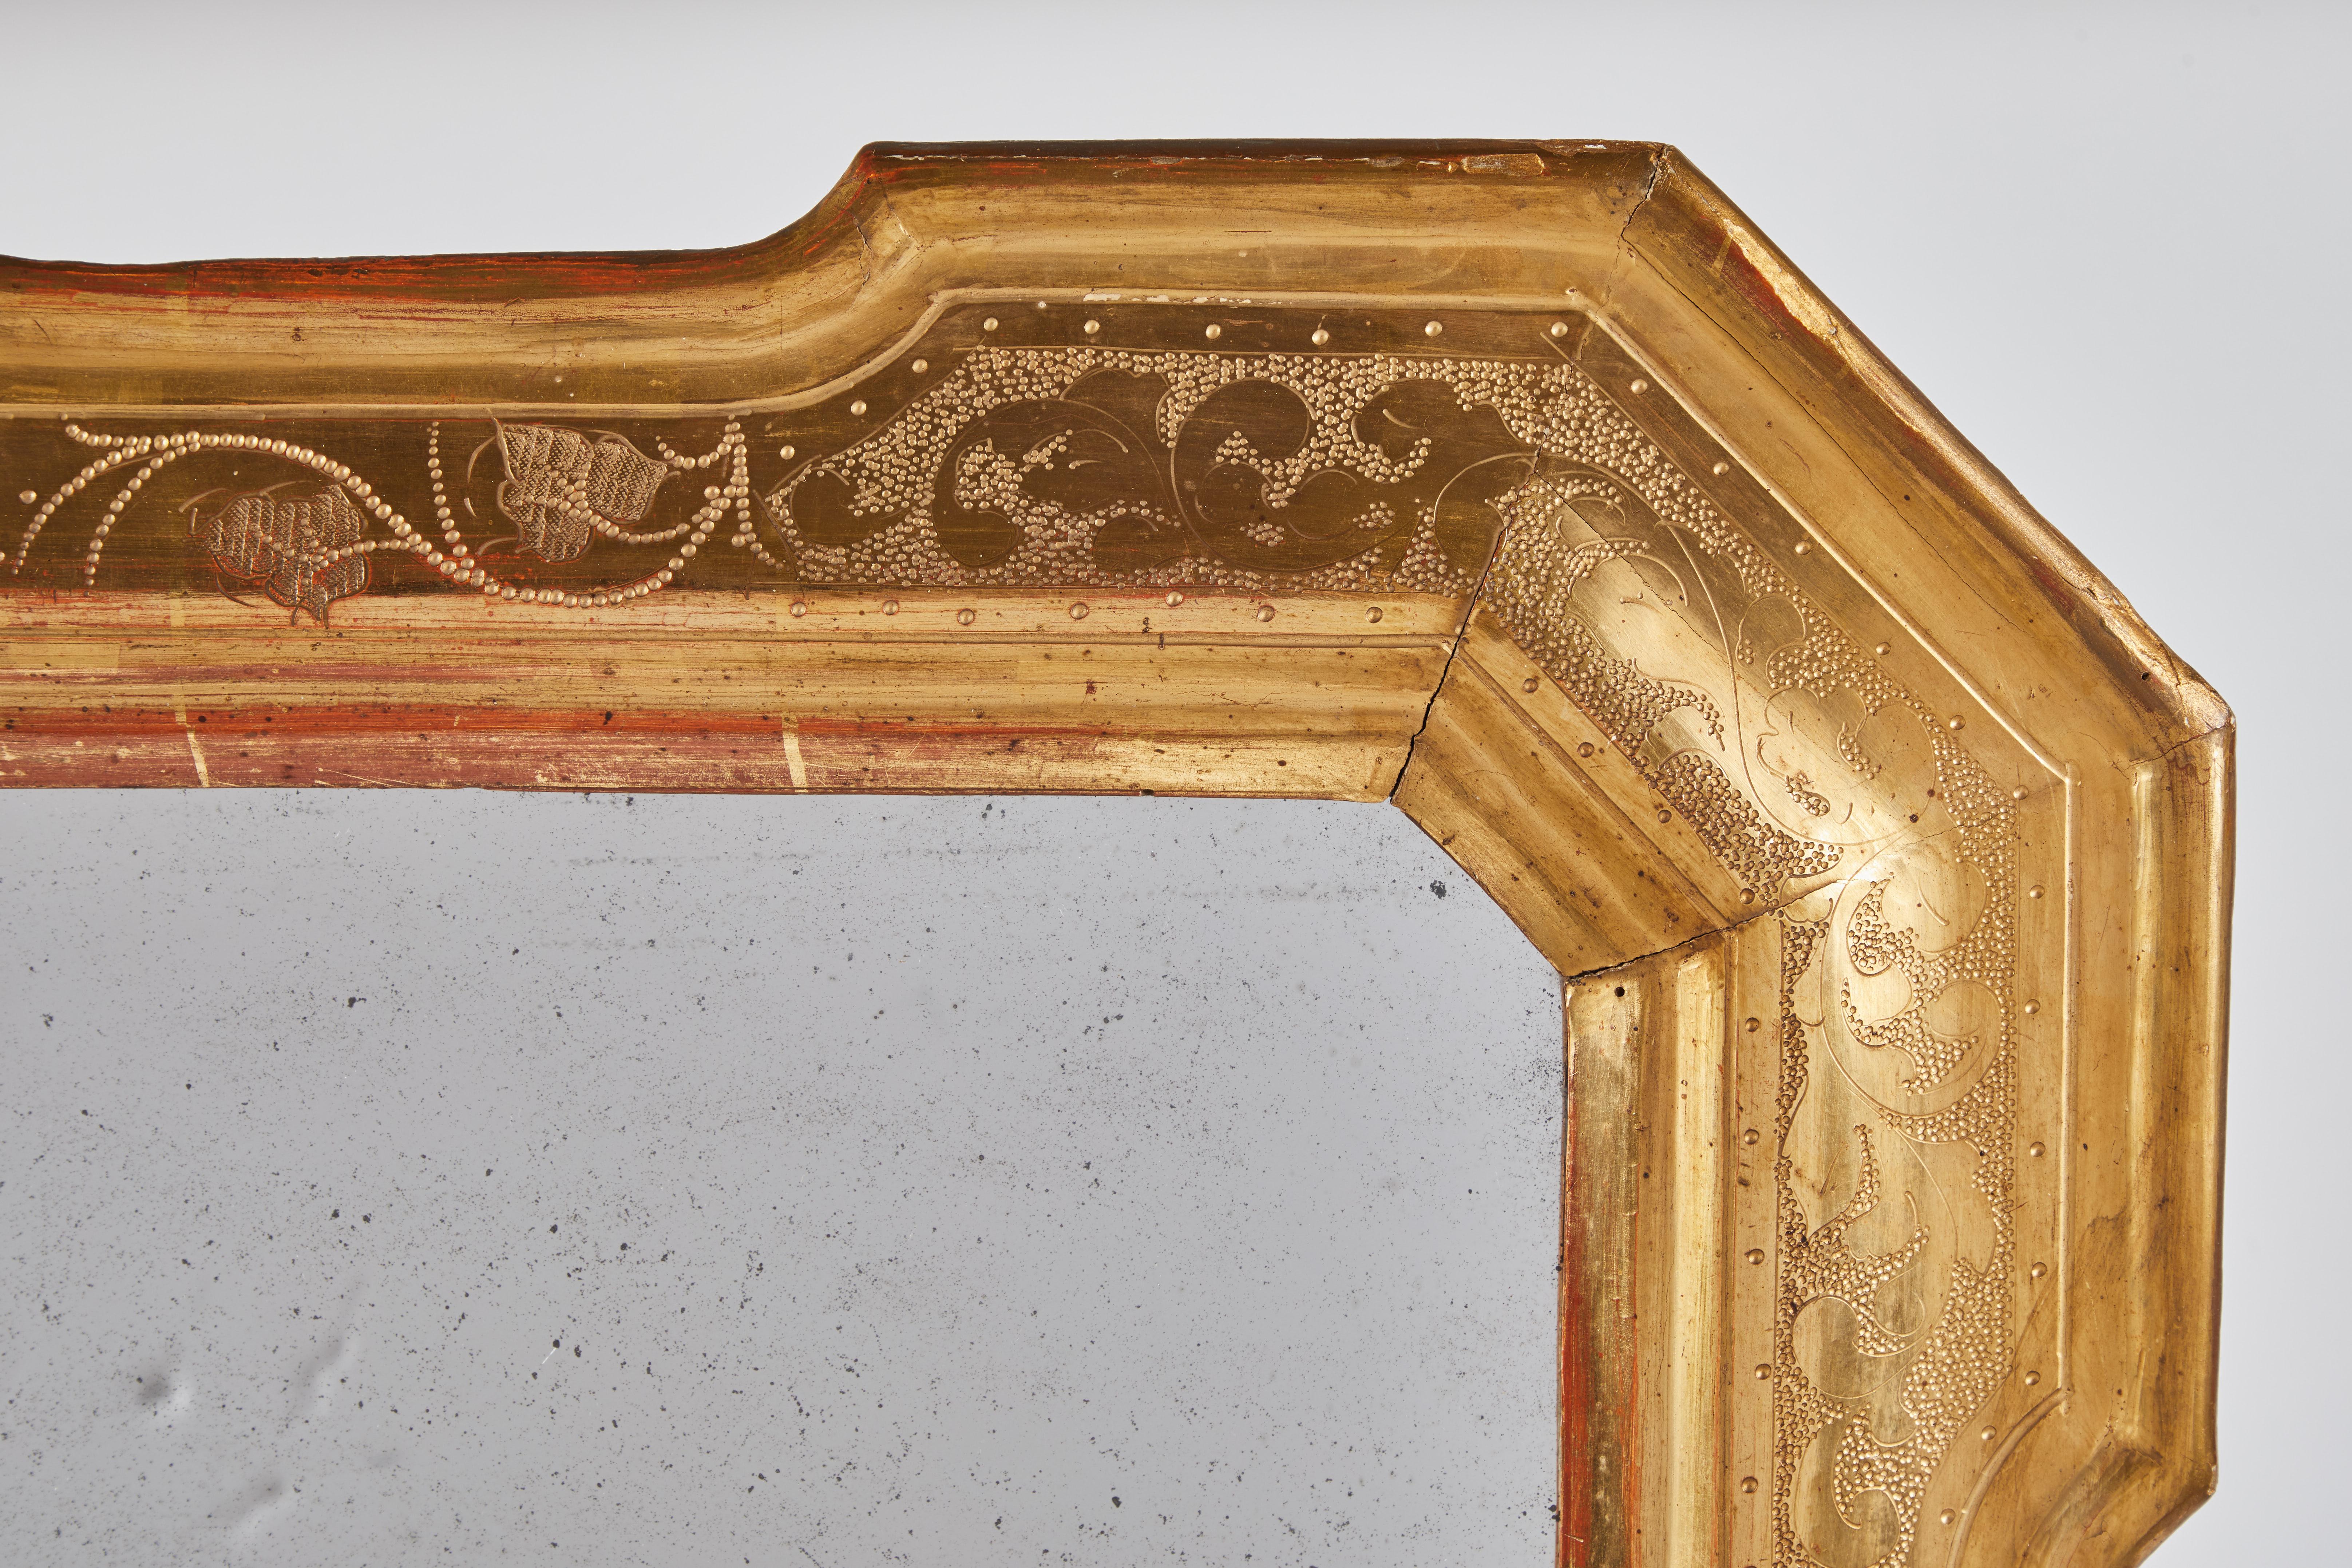 An 18th century mirror with hammered detailing from Lombardy. Petite rectangular frame with angles corners. Very sweet floral detailing hammered into the gilt frame.